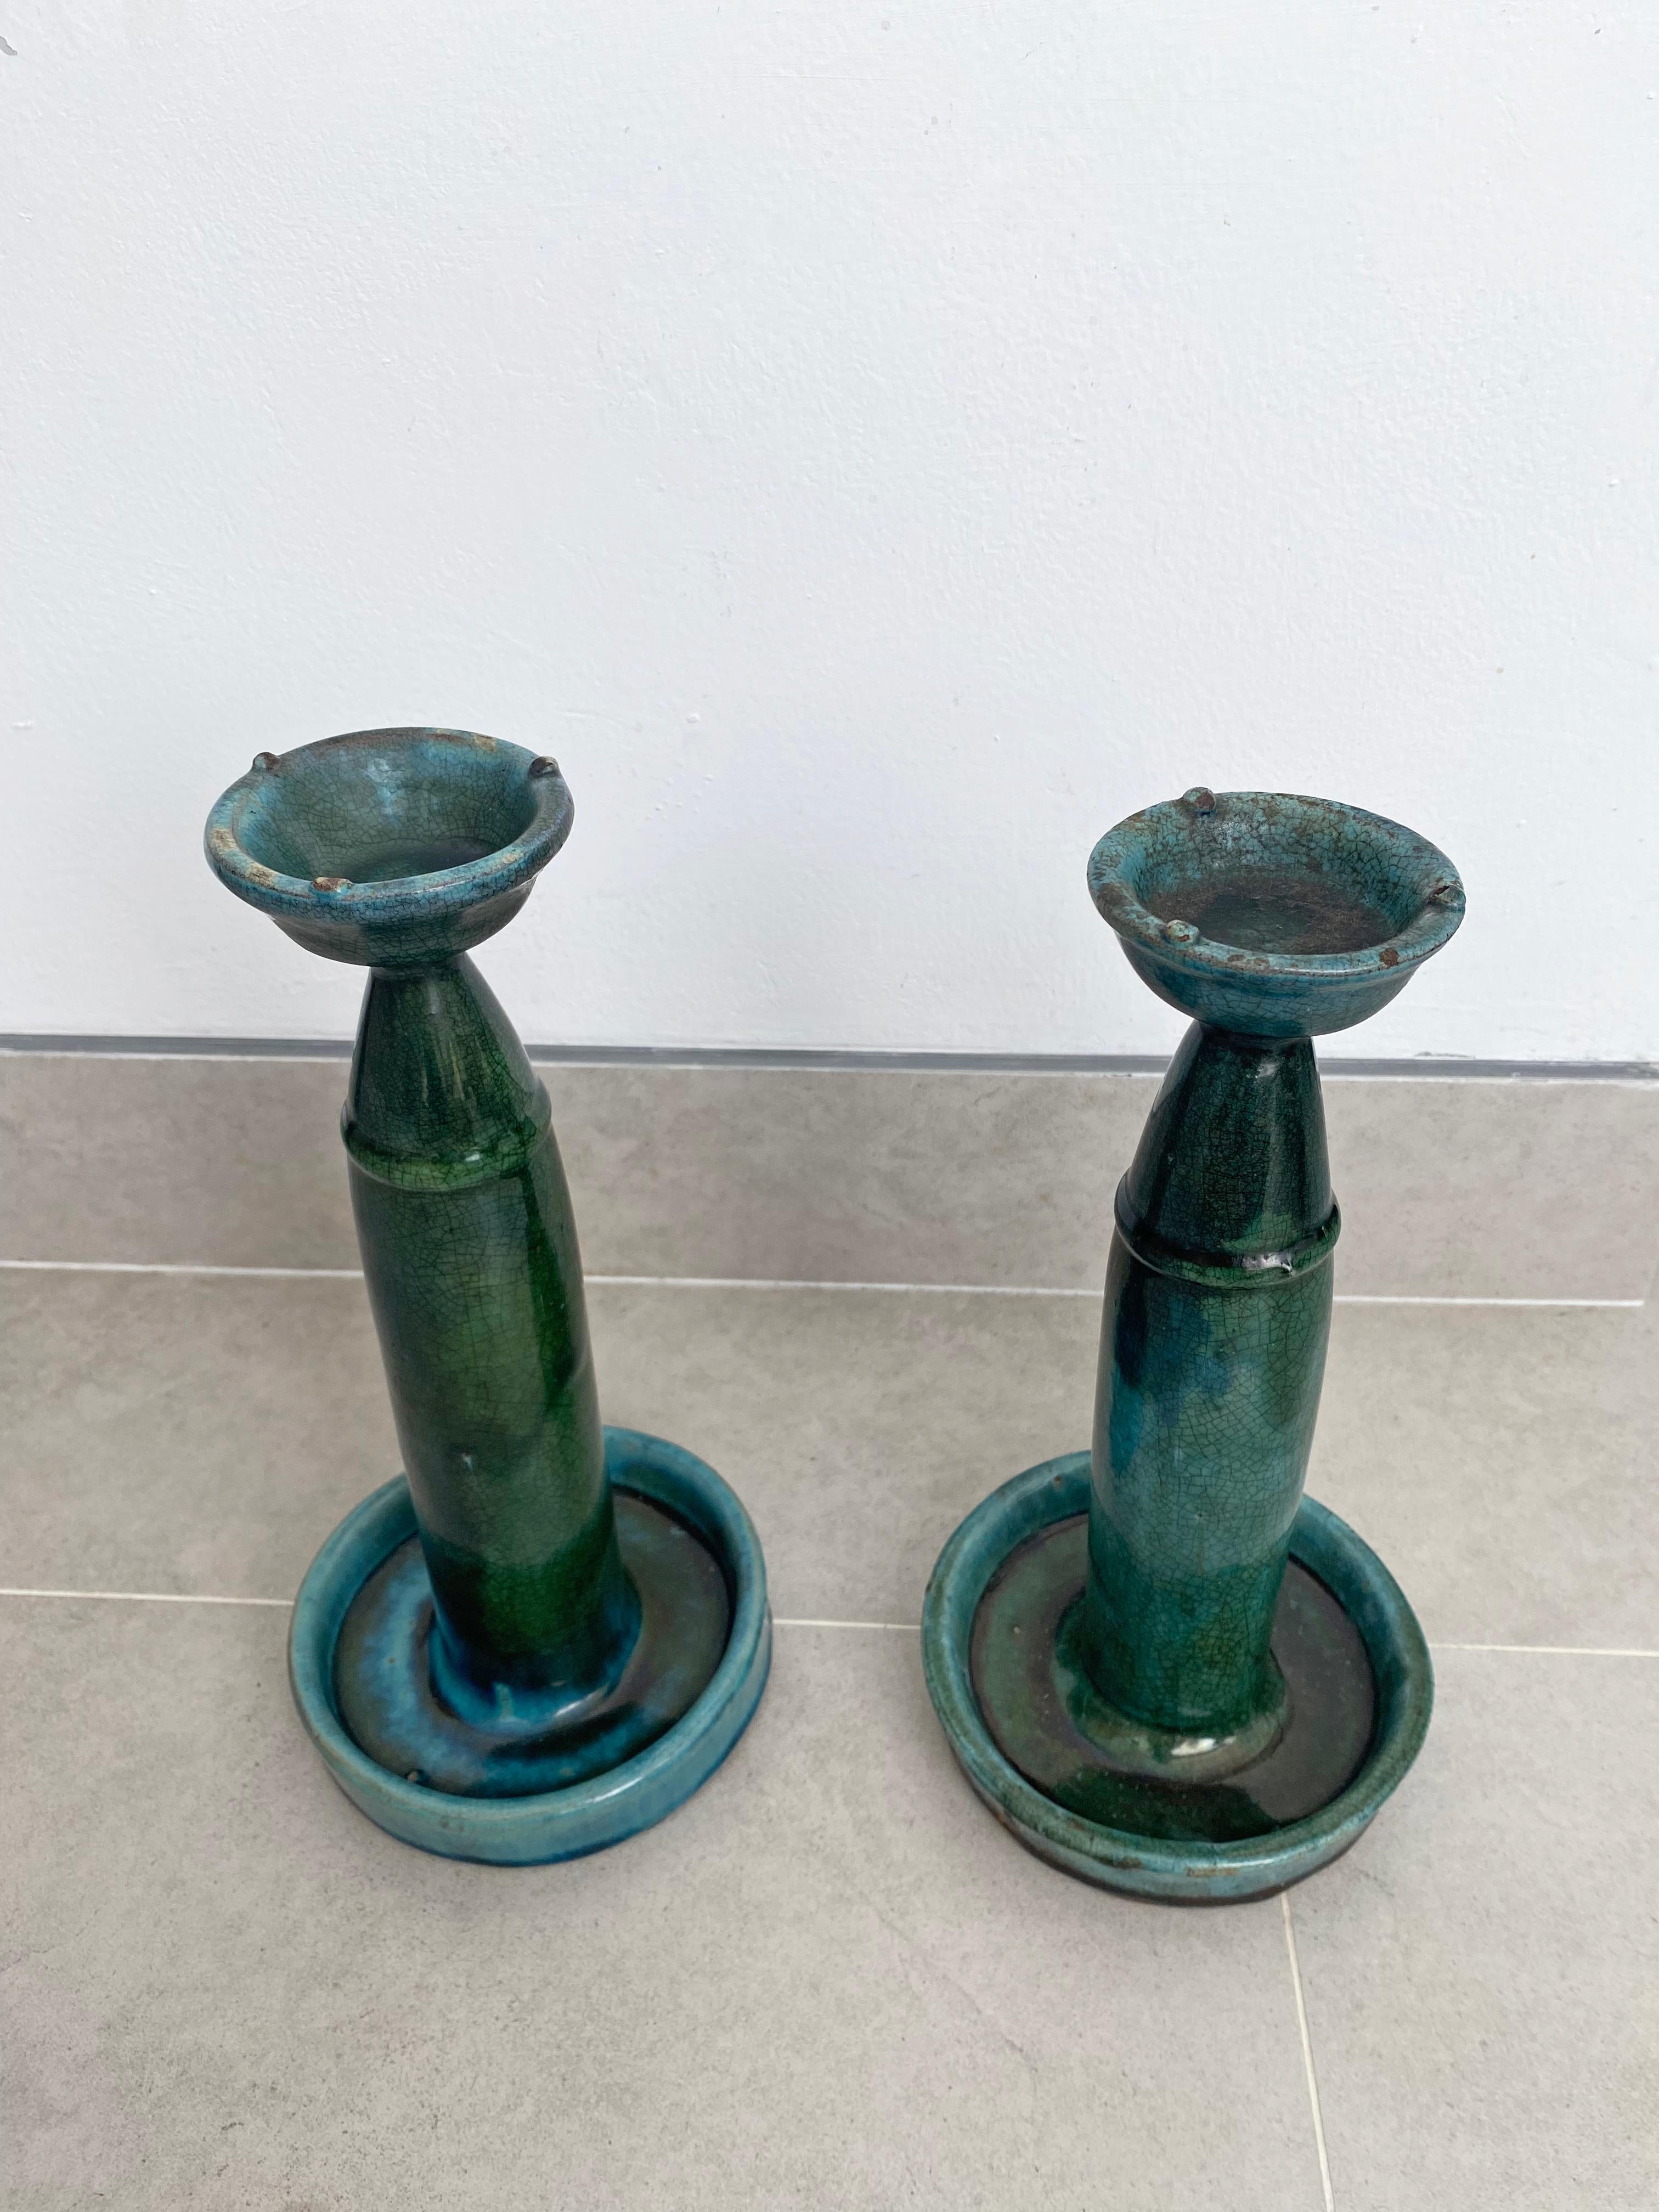 Other Chinese Ceramic 'Shiwan' Oil Lamp / Candleholder Set, Green Glaze, c. 1900 For Sale